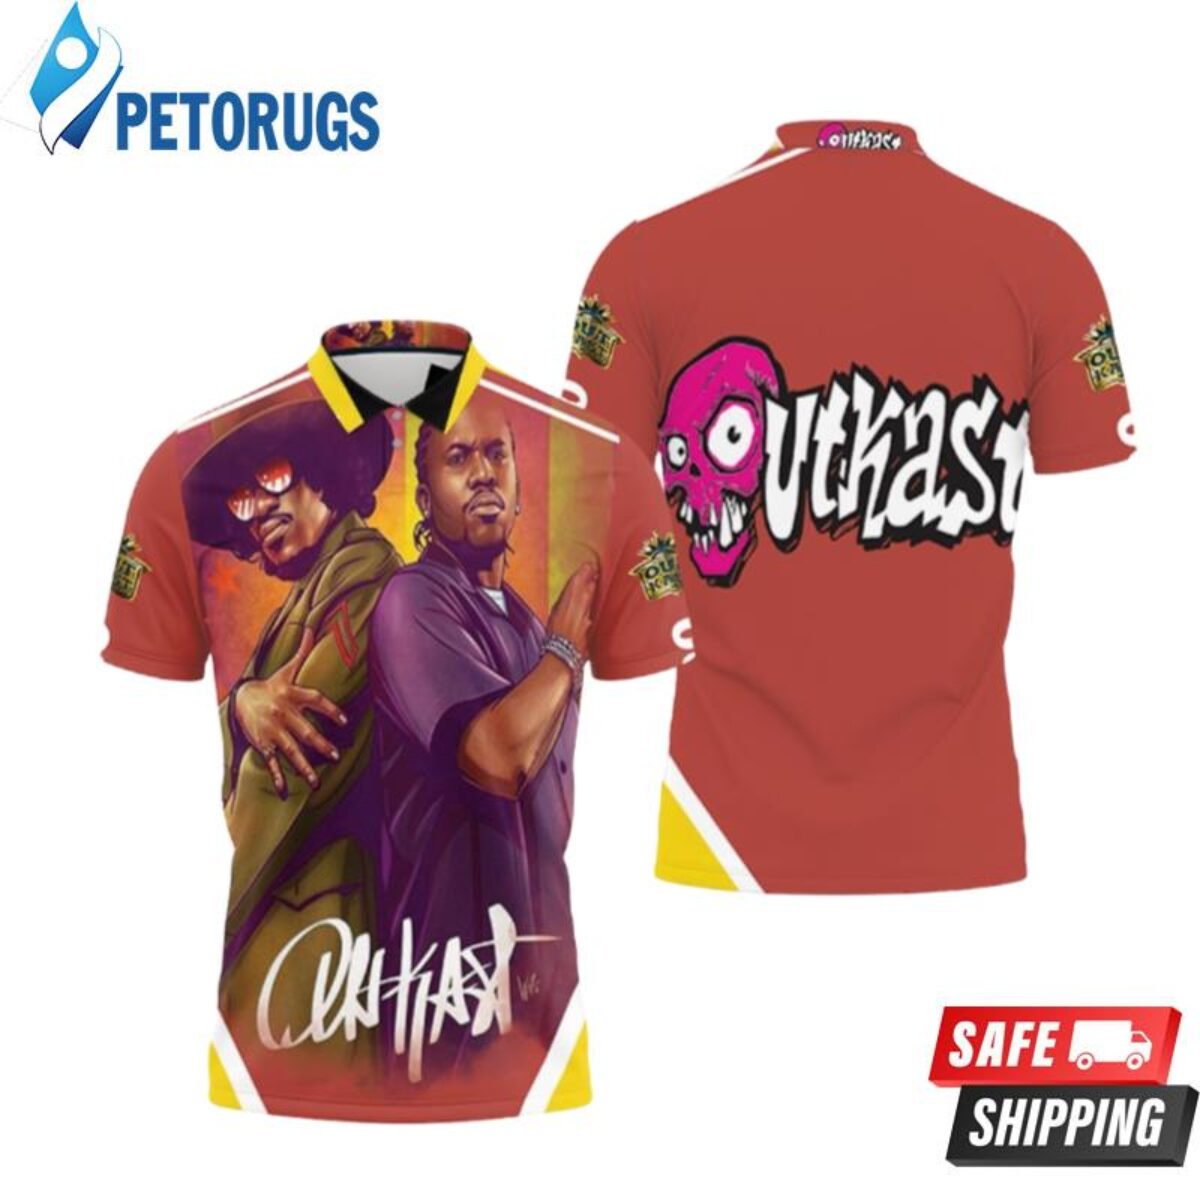 Outkast Atliens Polo Shirts - Peto Rugs